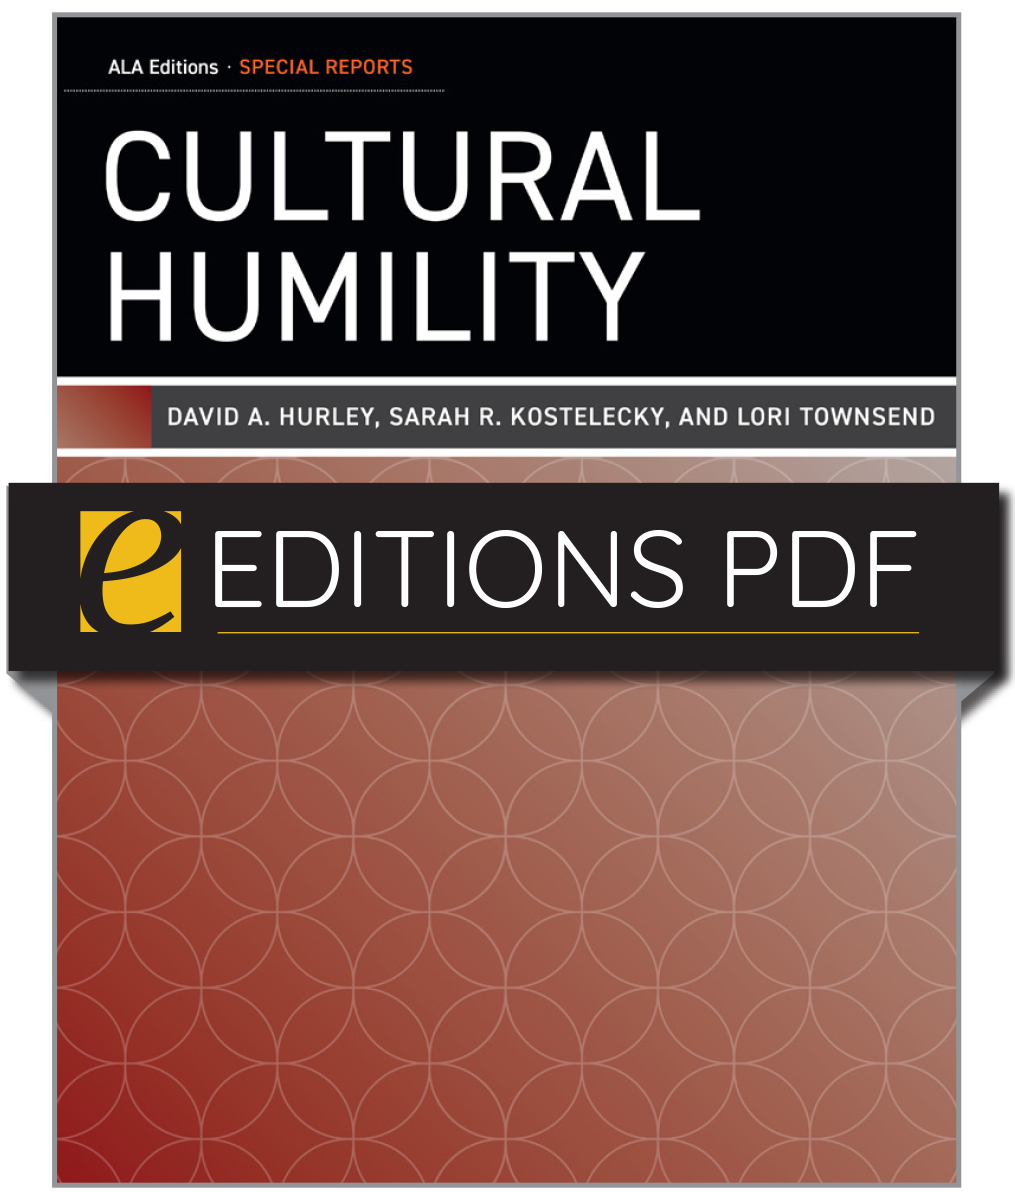 Image for Cultural Humility—eEditions PDF e-book